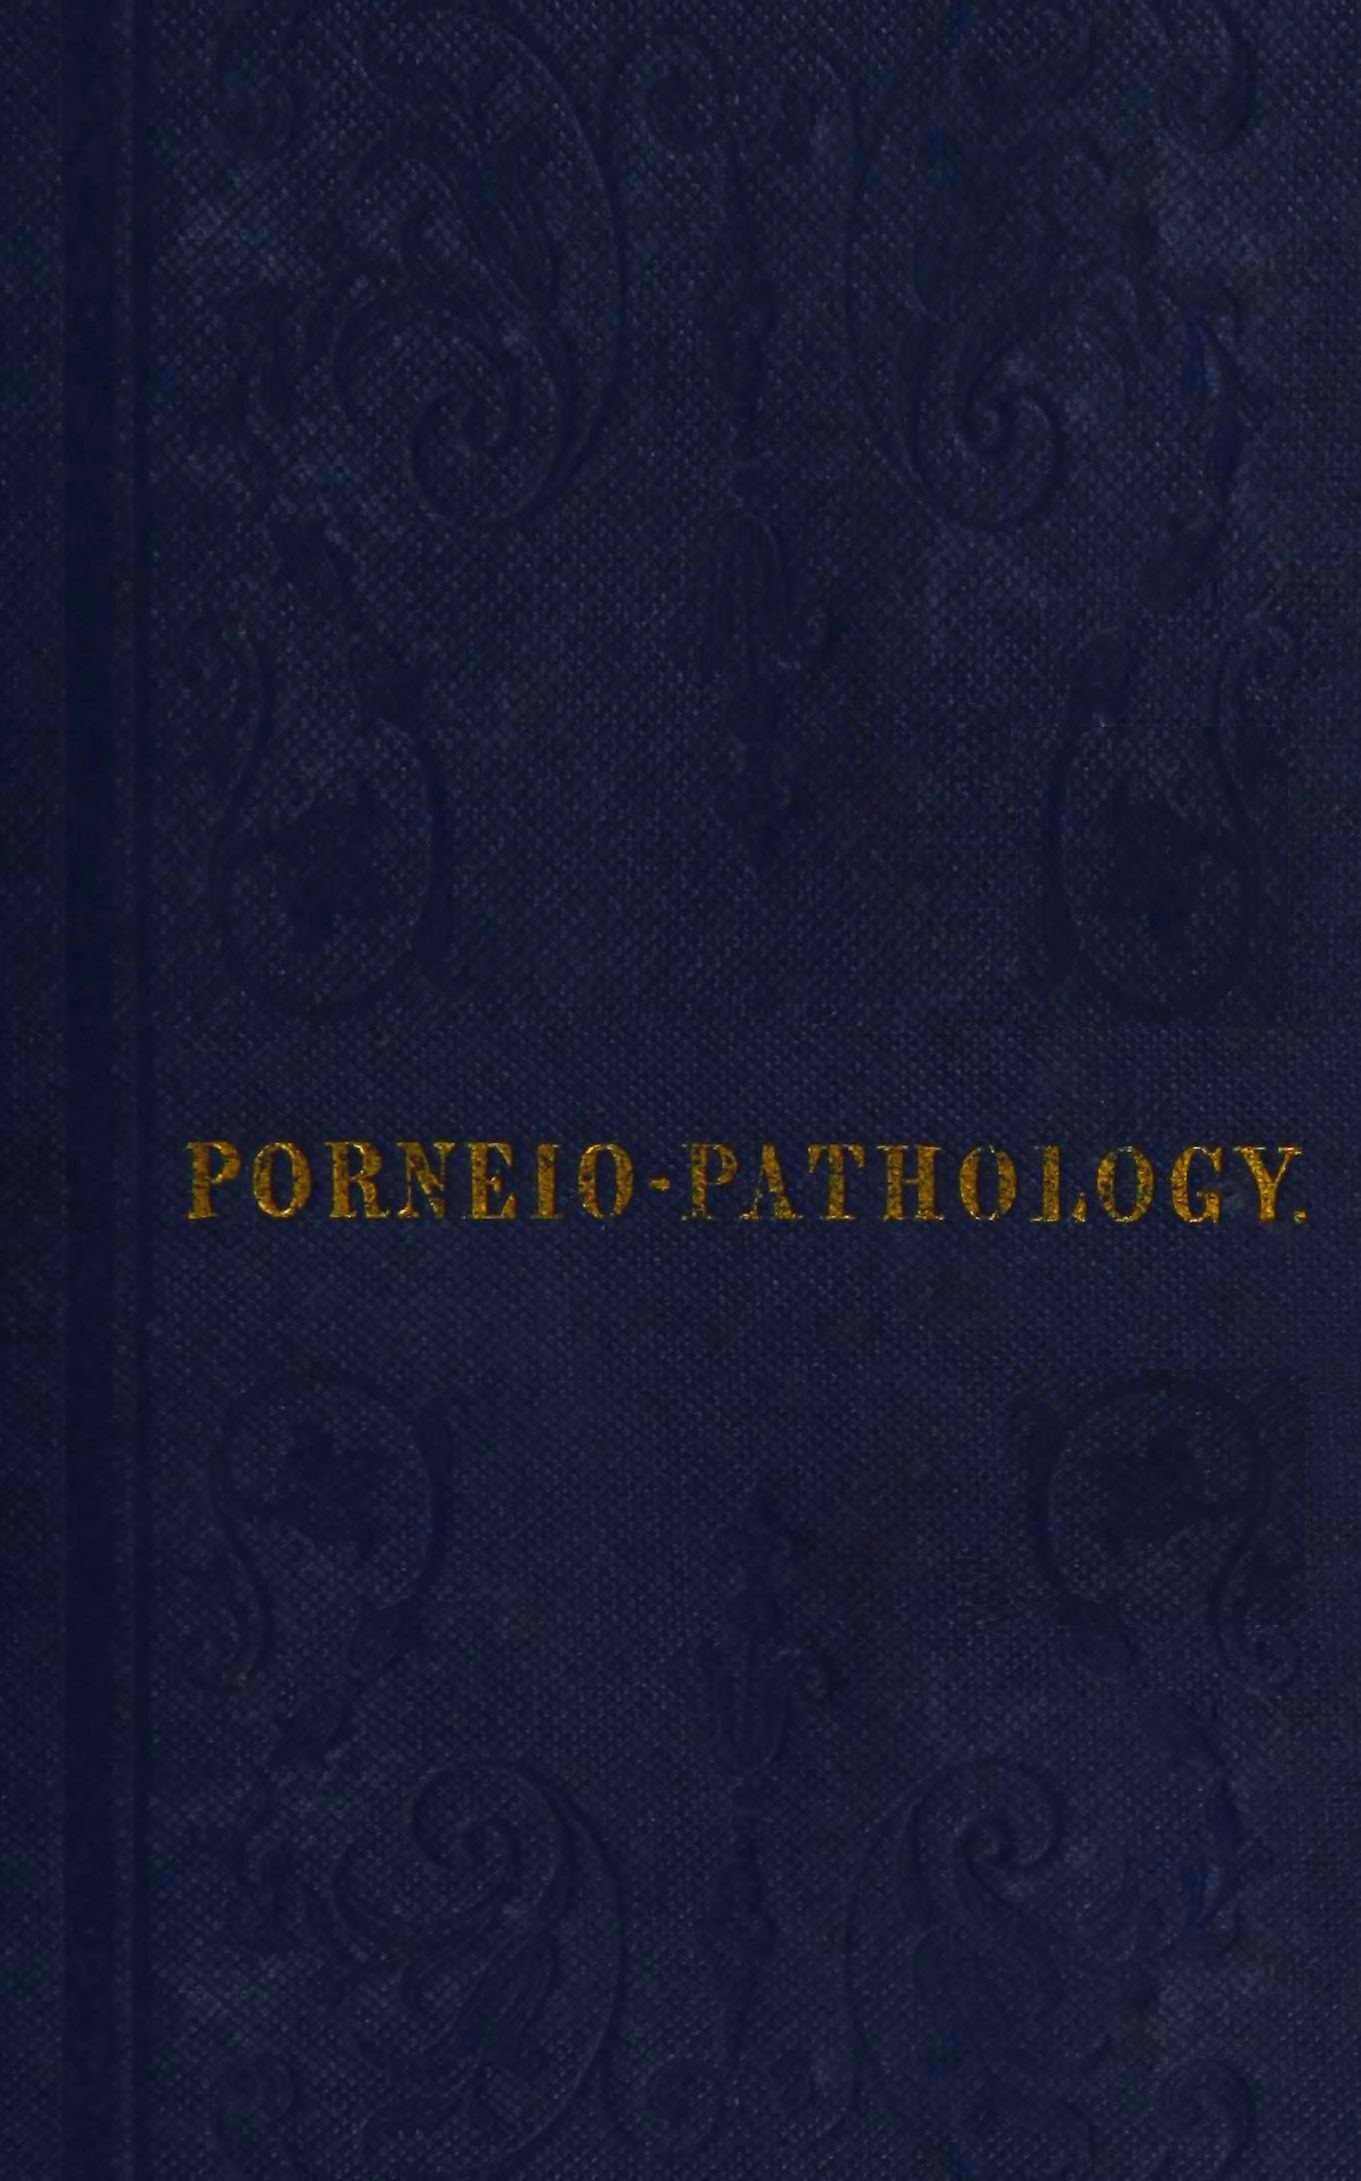 Porneiopathology&#10;A Popular Treatise on Venereal and Other Diseases of the Male and Female Genital System; With Remarks on Impotence, Onanism, Sterility, Piles, and Gravel, and Prescriptions for Their Treatment